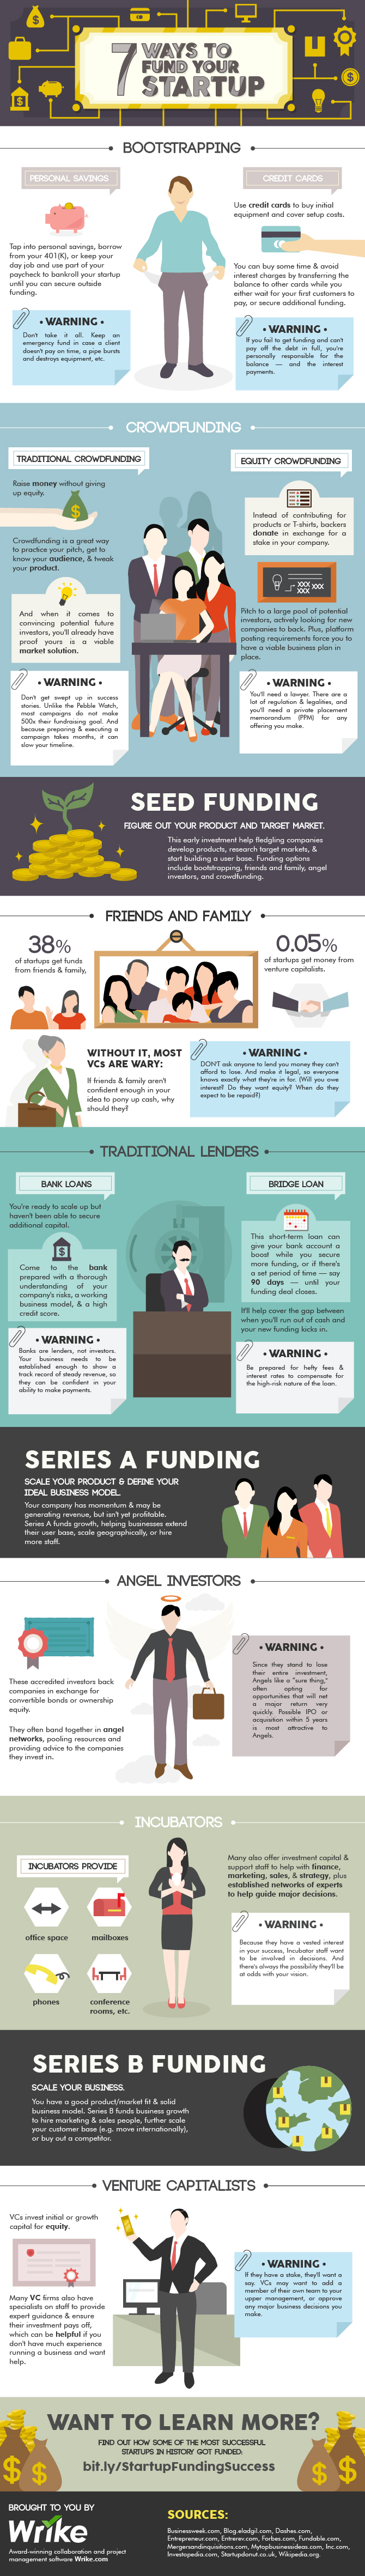 7 Ways to Fund Your Startup (#Infographic)